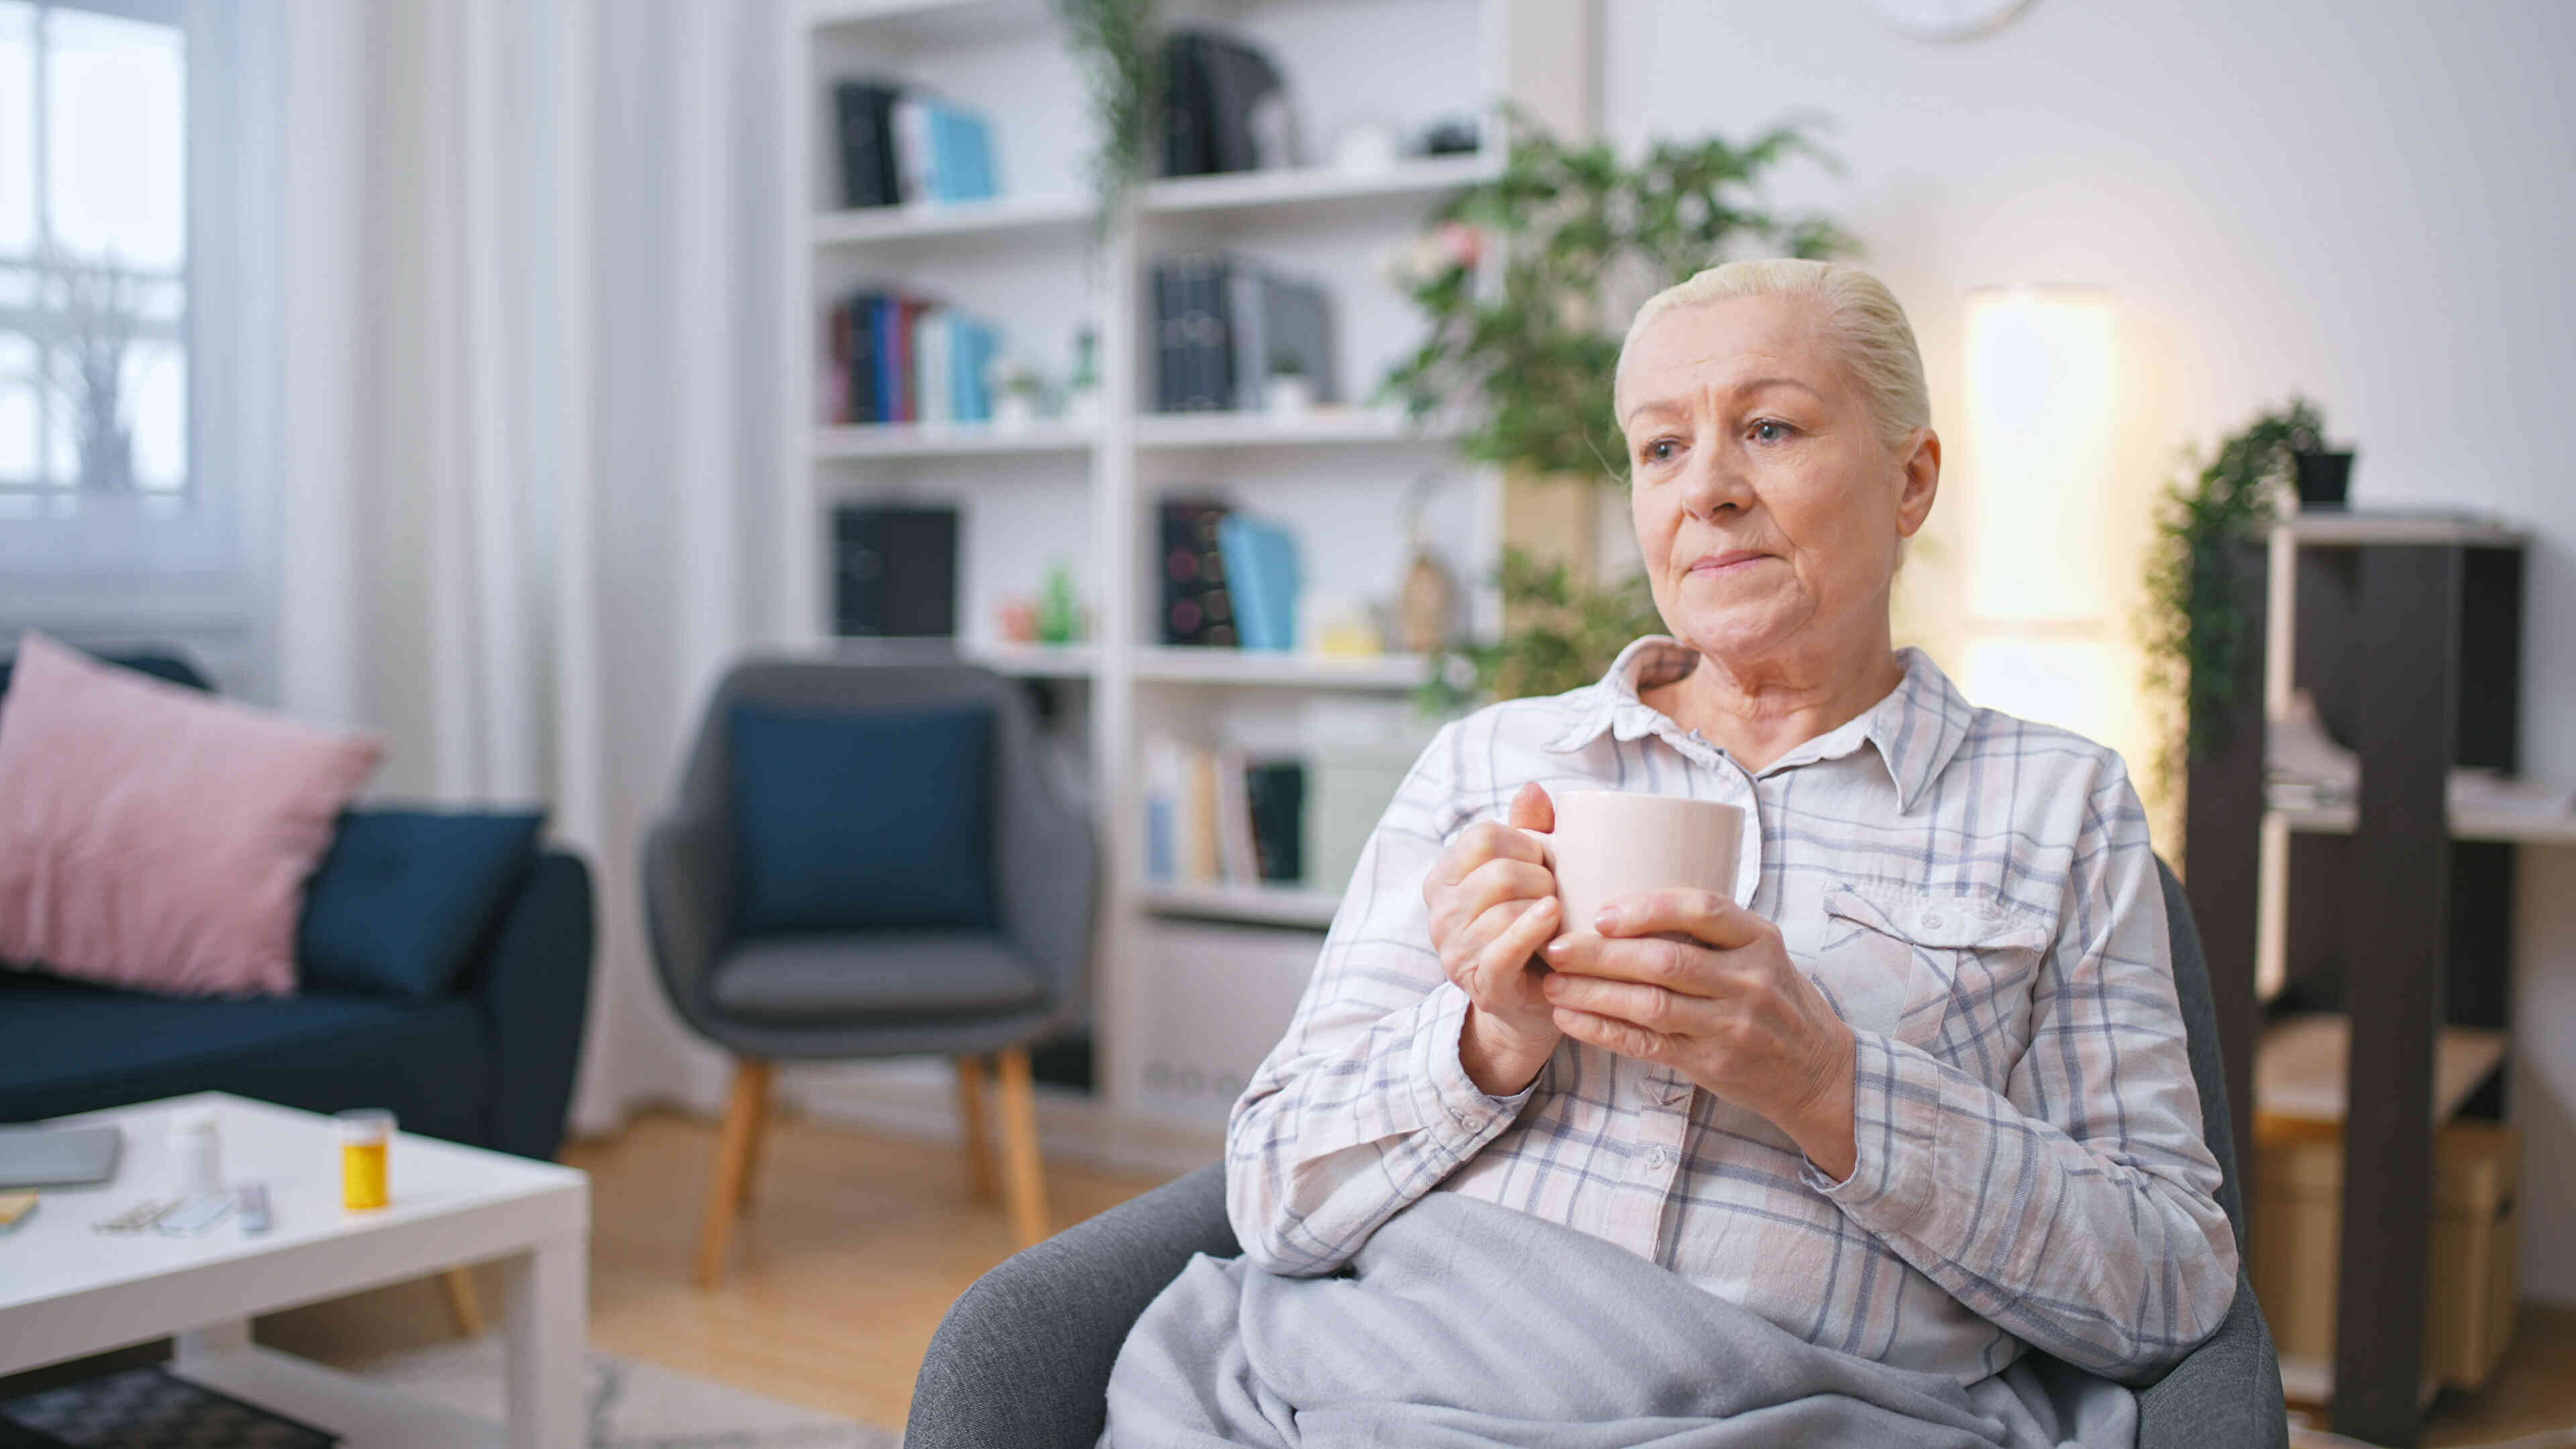 A mature woman in a plaid shirt sits in an armchair in her home and holds a coffee mug while gazing off with a worried expression.